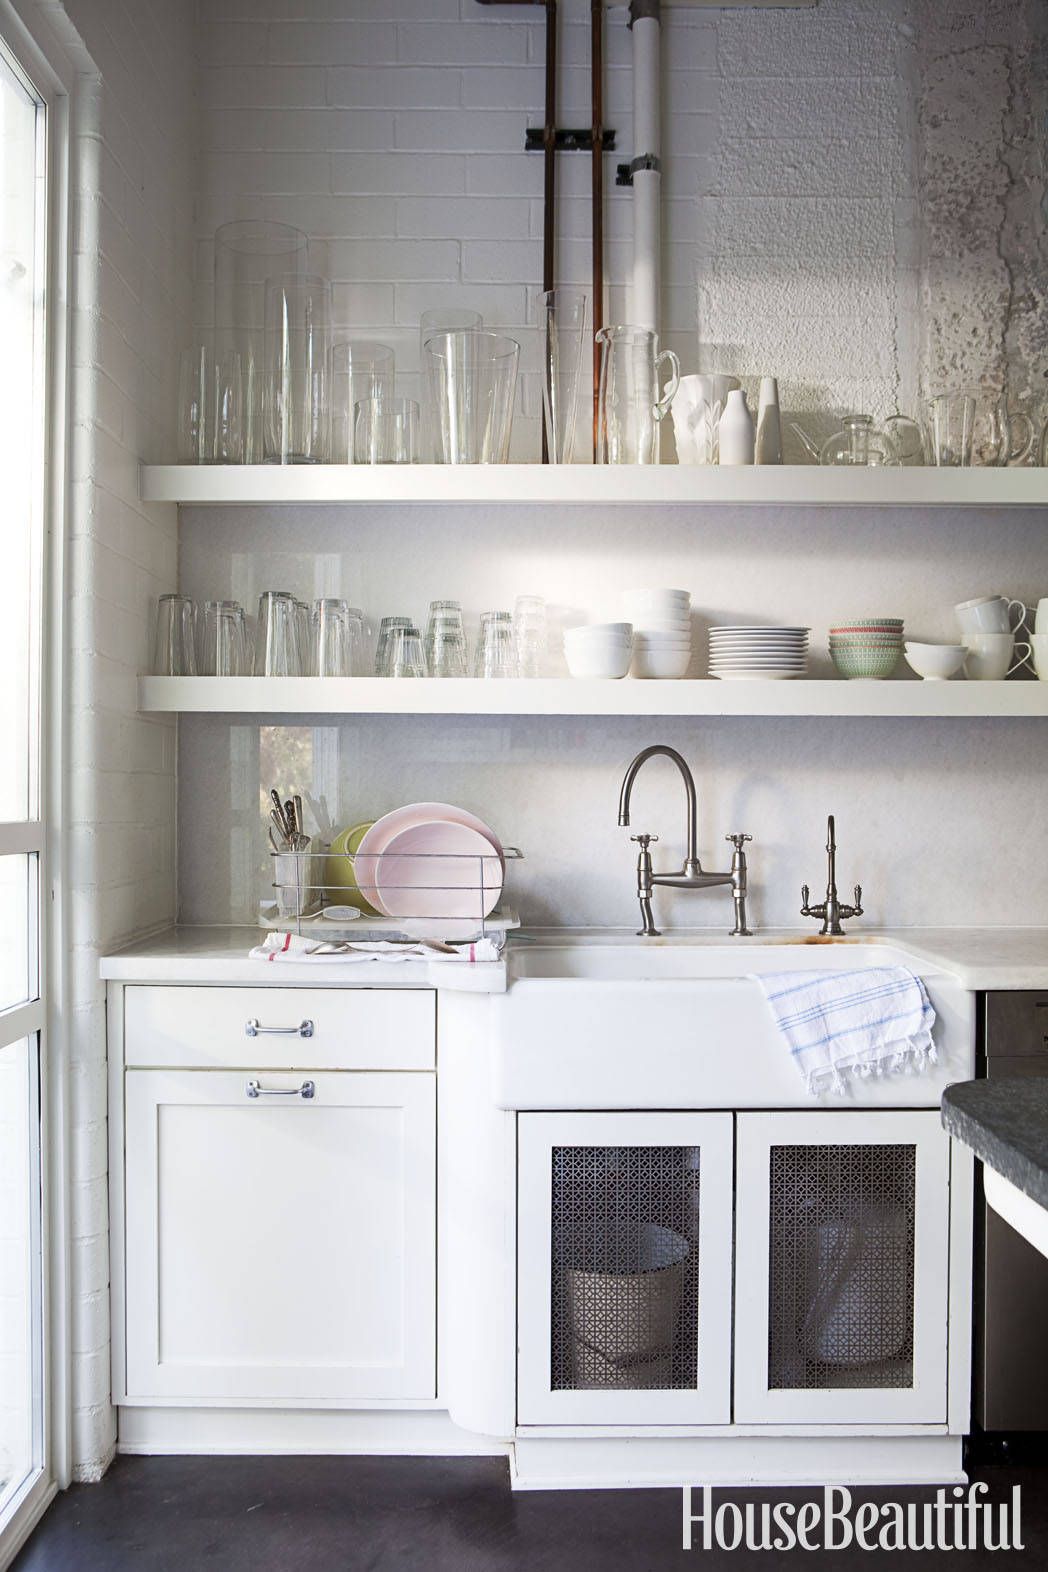 Hate Open Shelving? These 15 Kitchens Might Convince You Otherwise